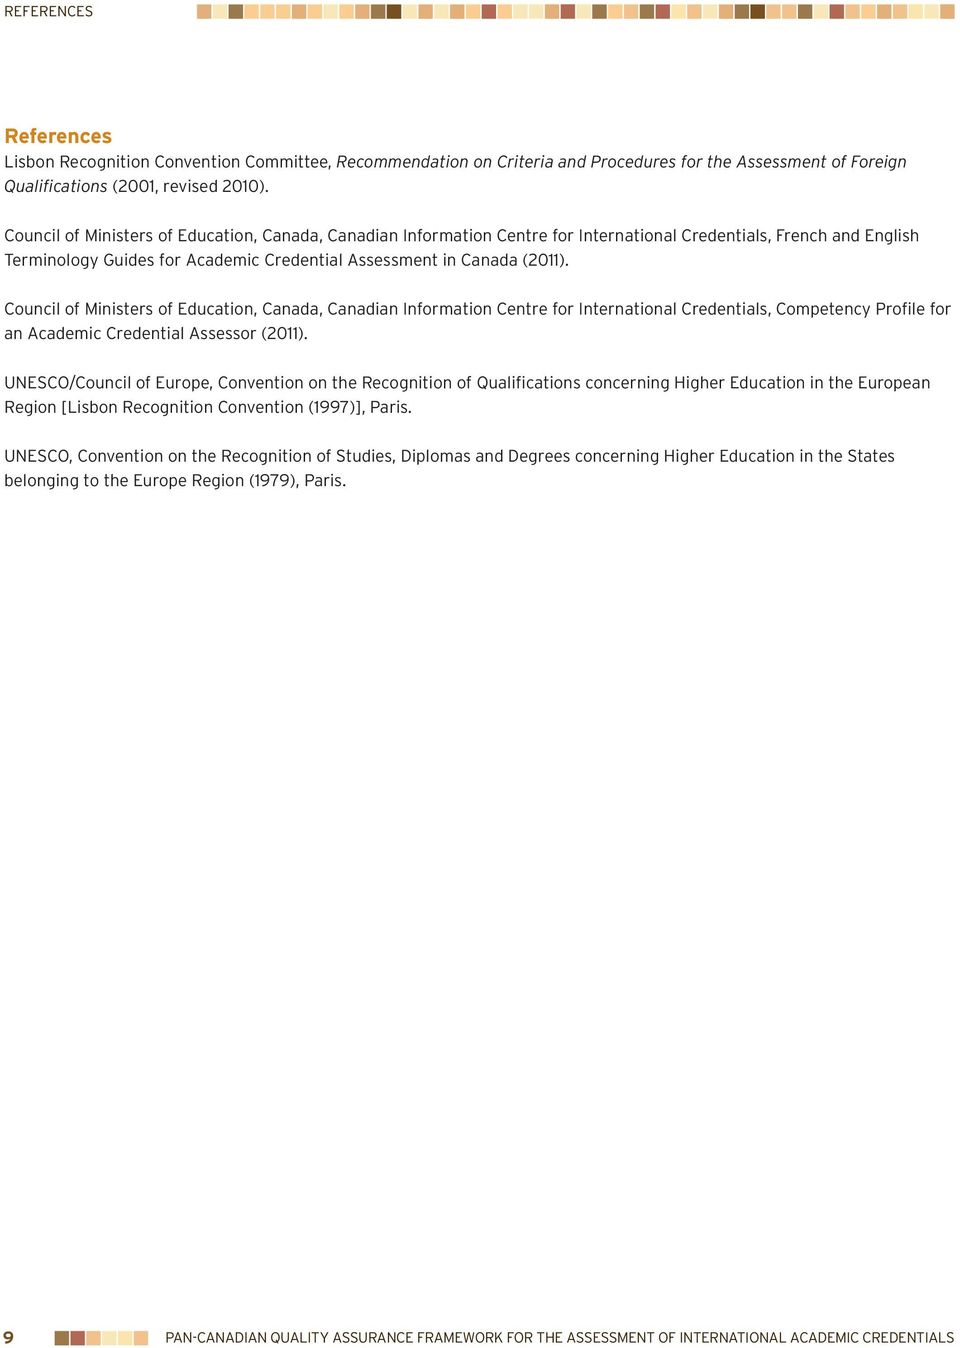 Council of Ministers of Education, Canada, Canadian Information Centre for International Credentials, Competency Profile for an Academic Credential Assessor (2011).